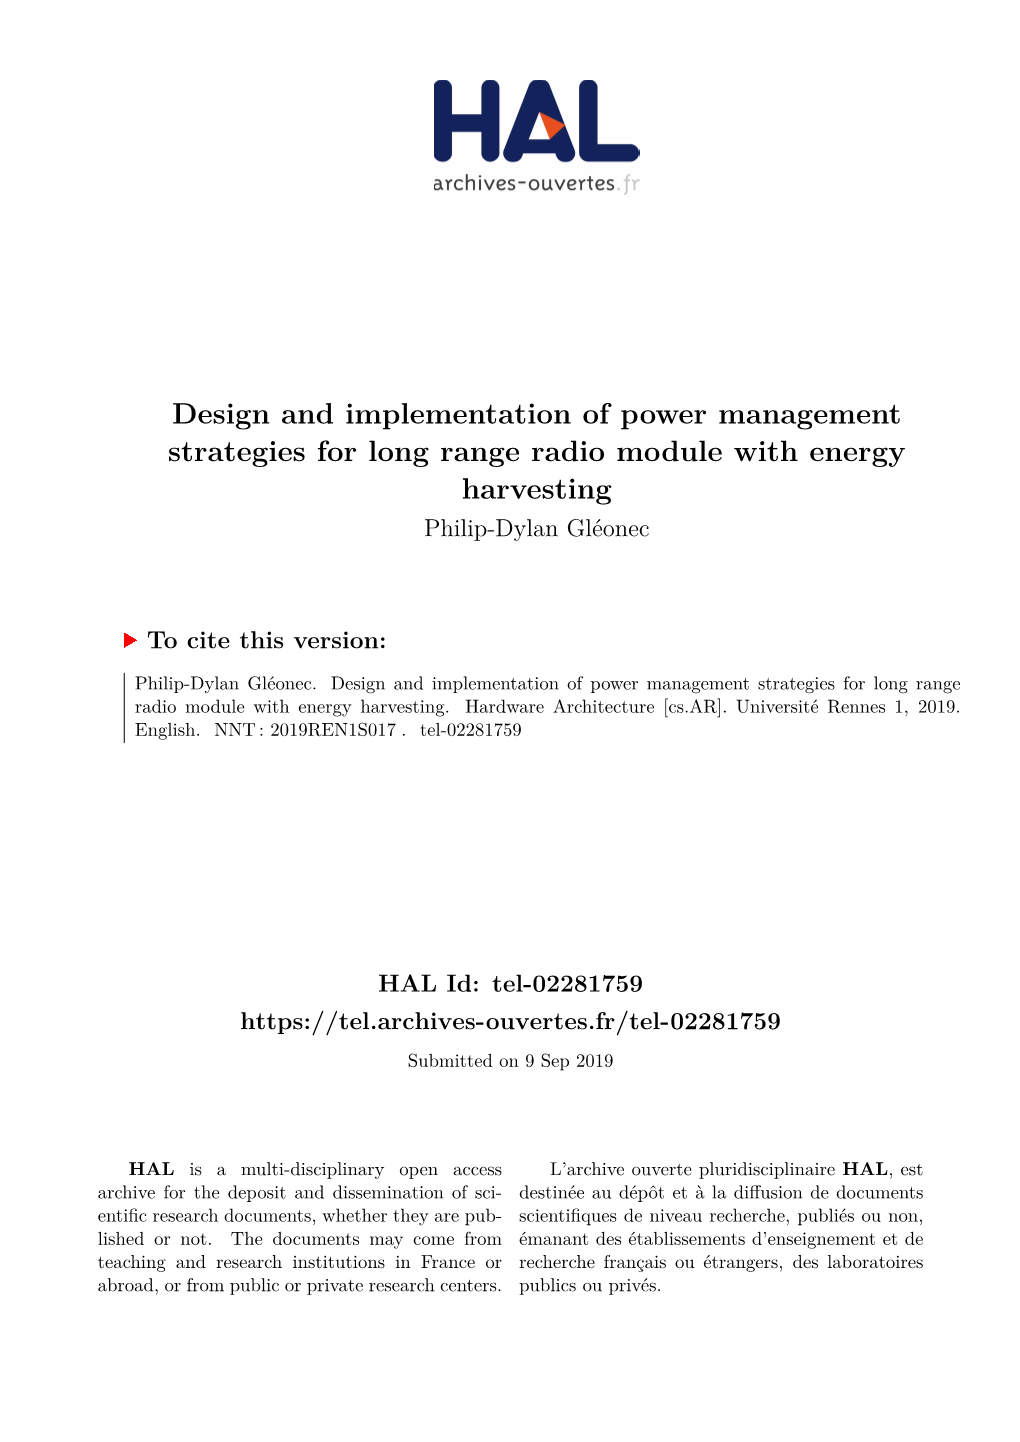 Design and Implementation of Power Management Strategies for Long Range Radio Module with Energy Harvesting Philip-Dylan Gléonec